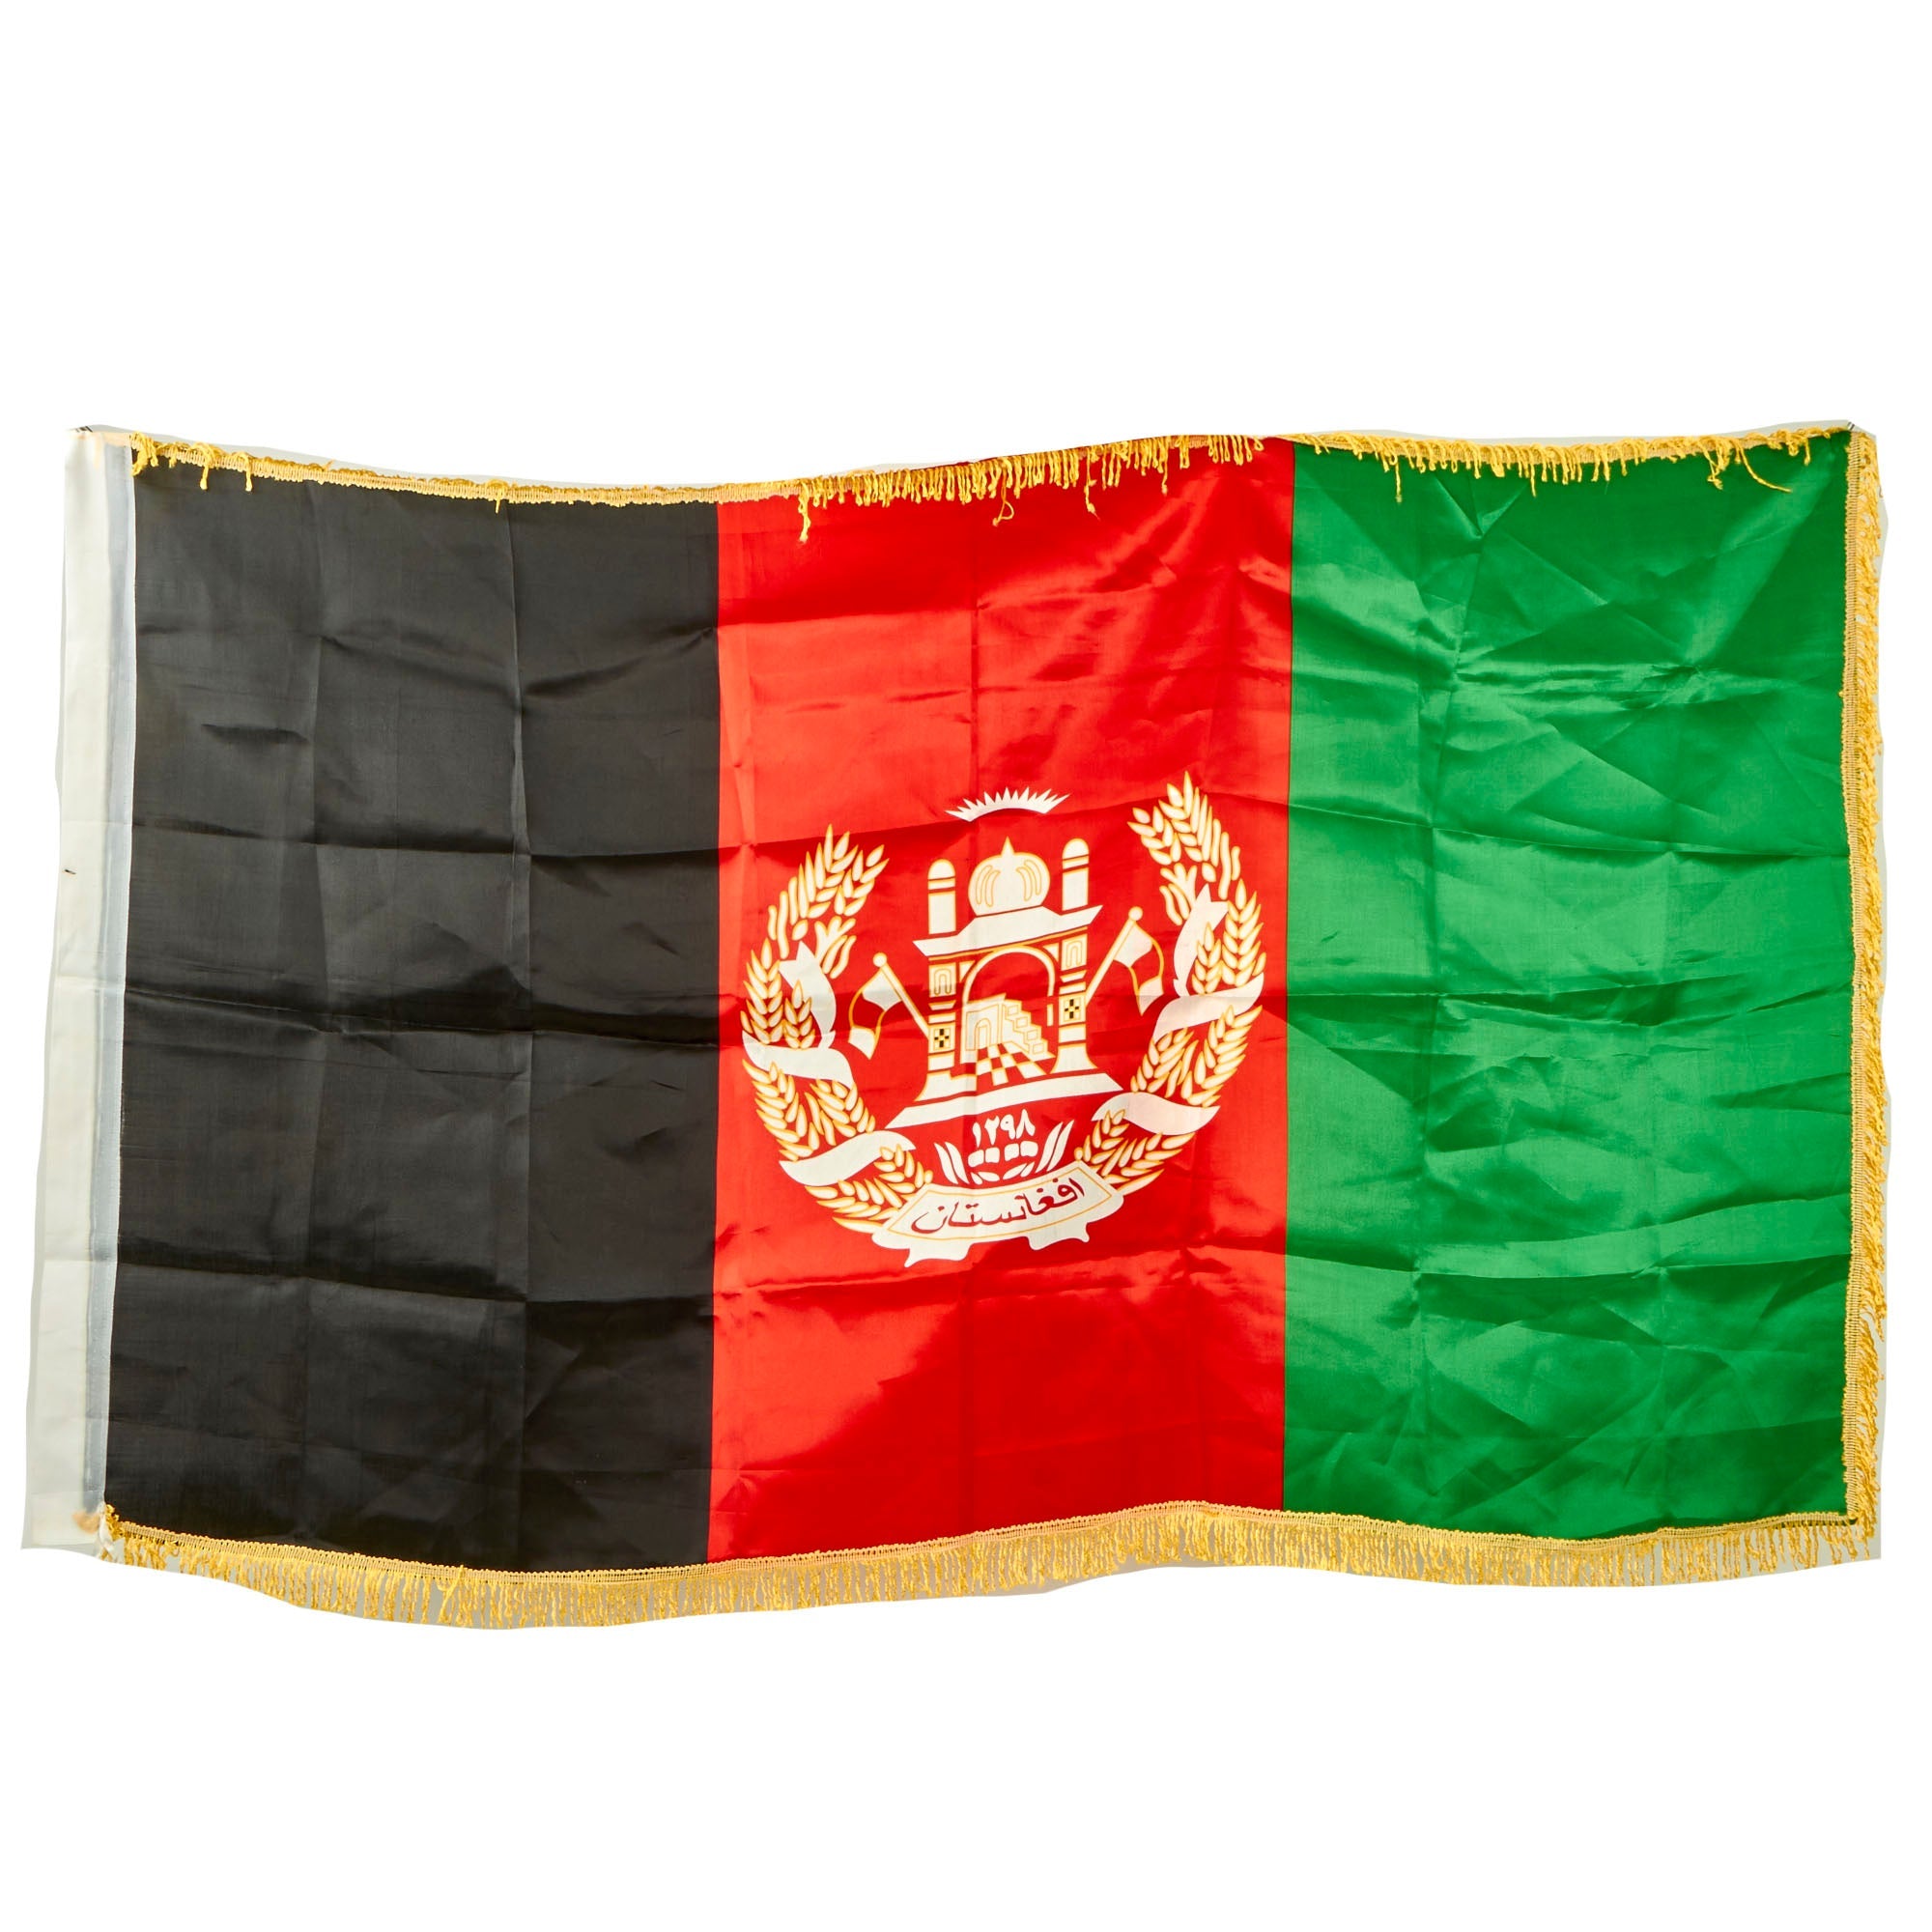 Afghanistan Flag for Sale - Buy online at Royal-Flags